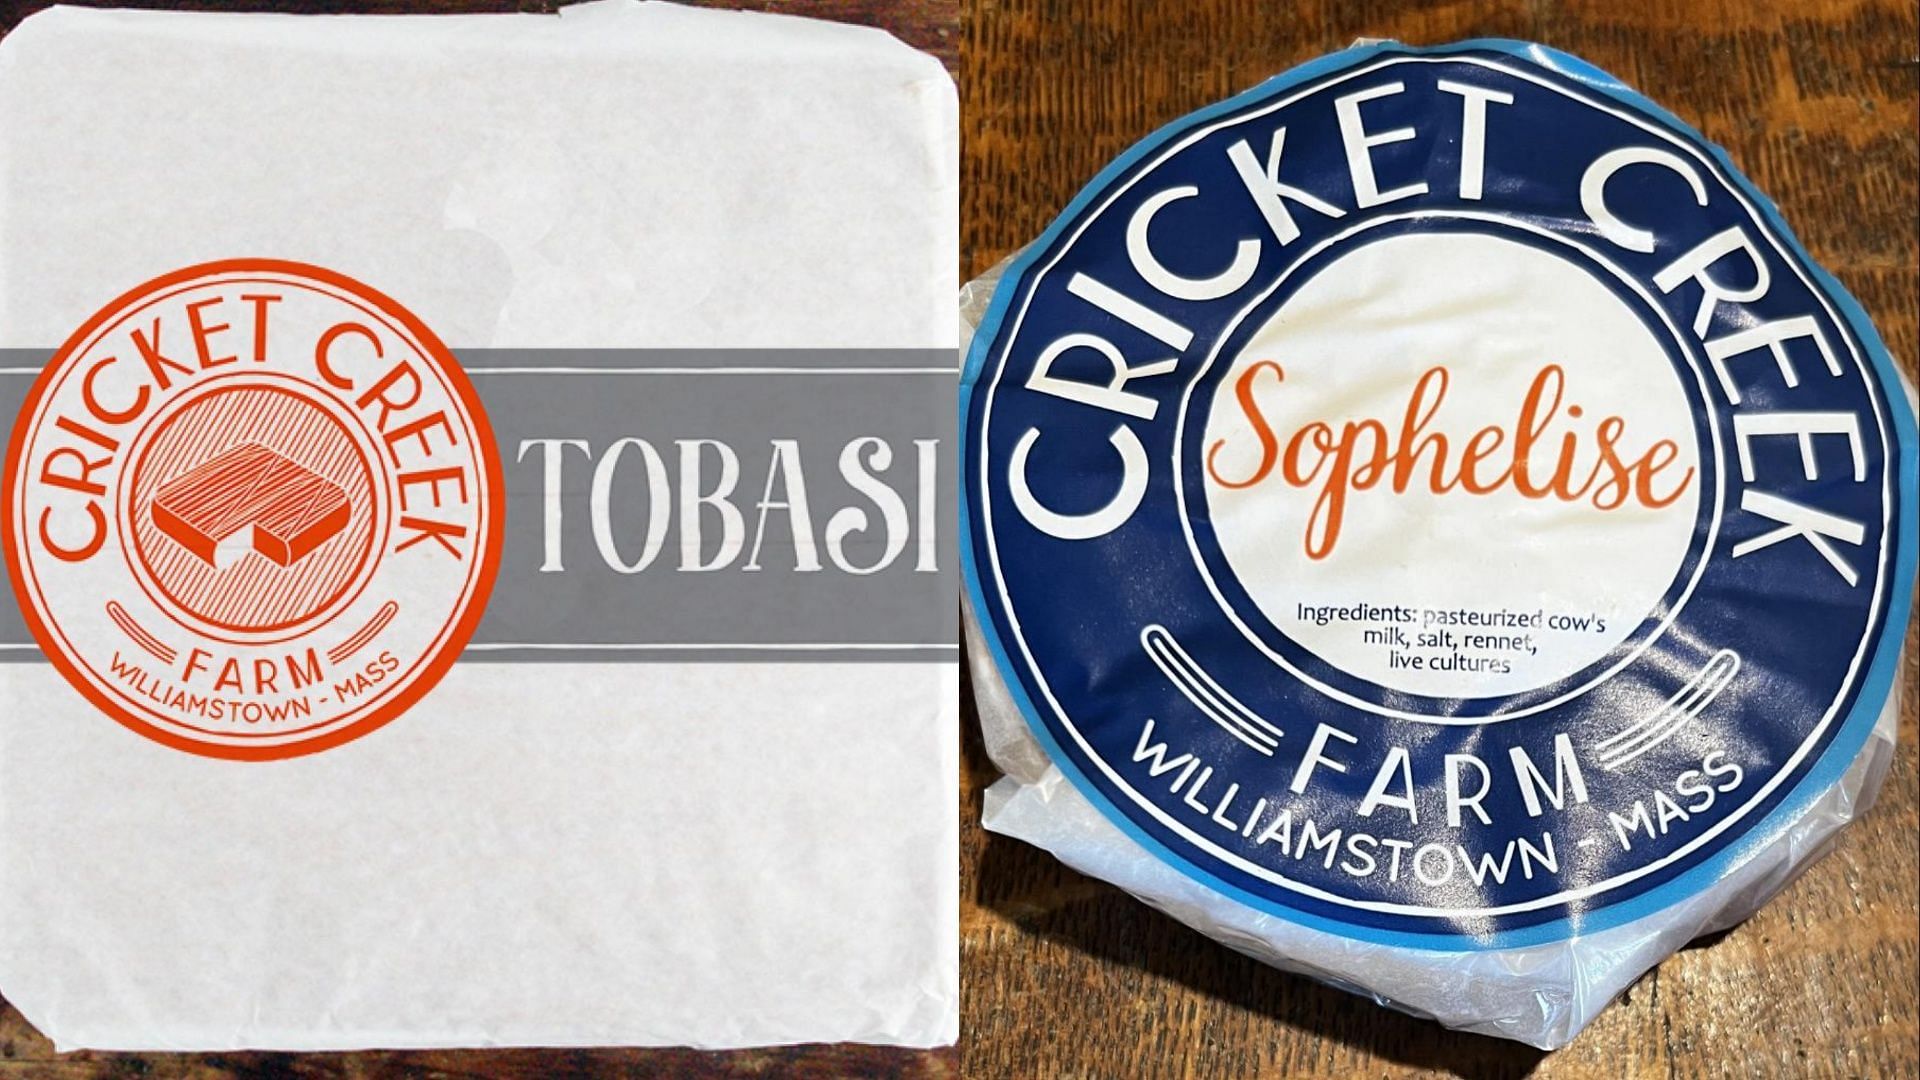 The recalled packs of Cricket Creek Farm&#039;s Tobasi and Sophelise cheese (Image via FDA)